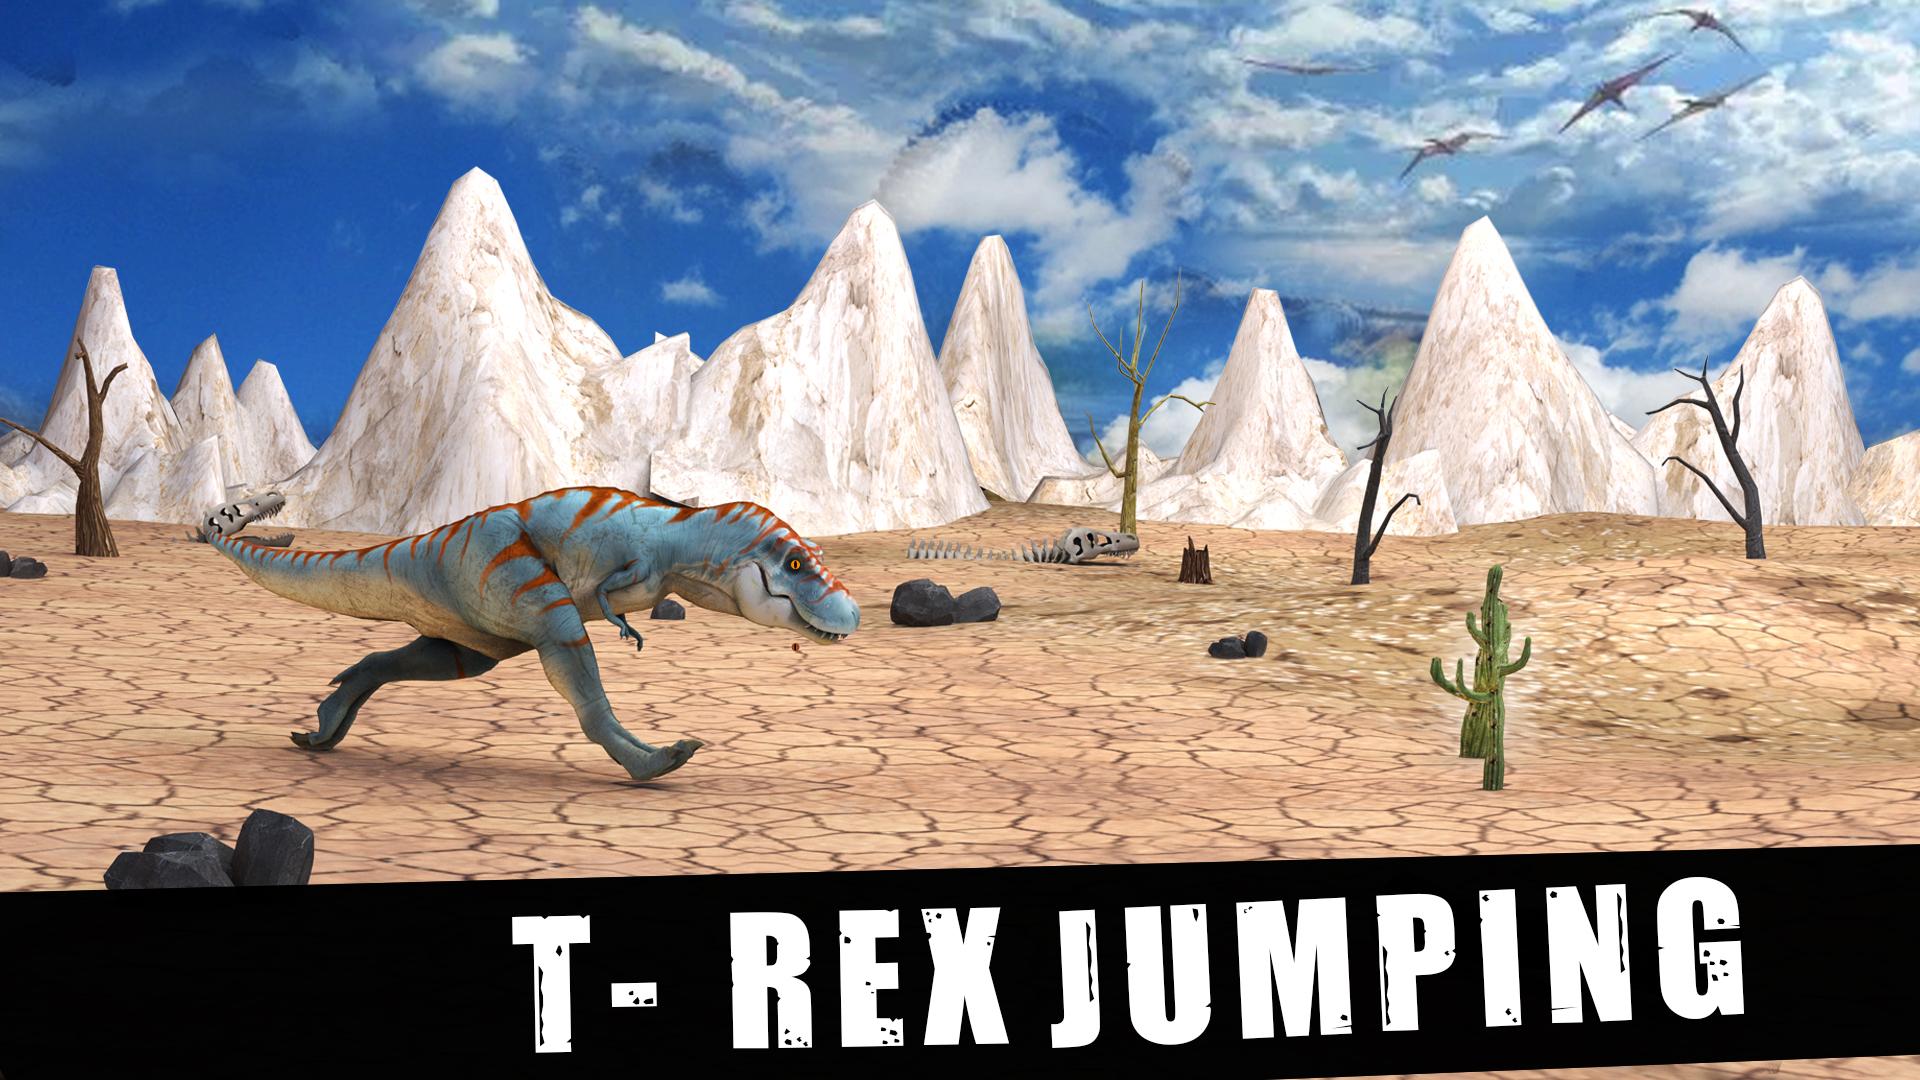 Dinos Survival Run Game for Android - Download